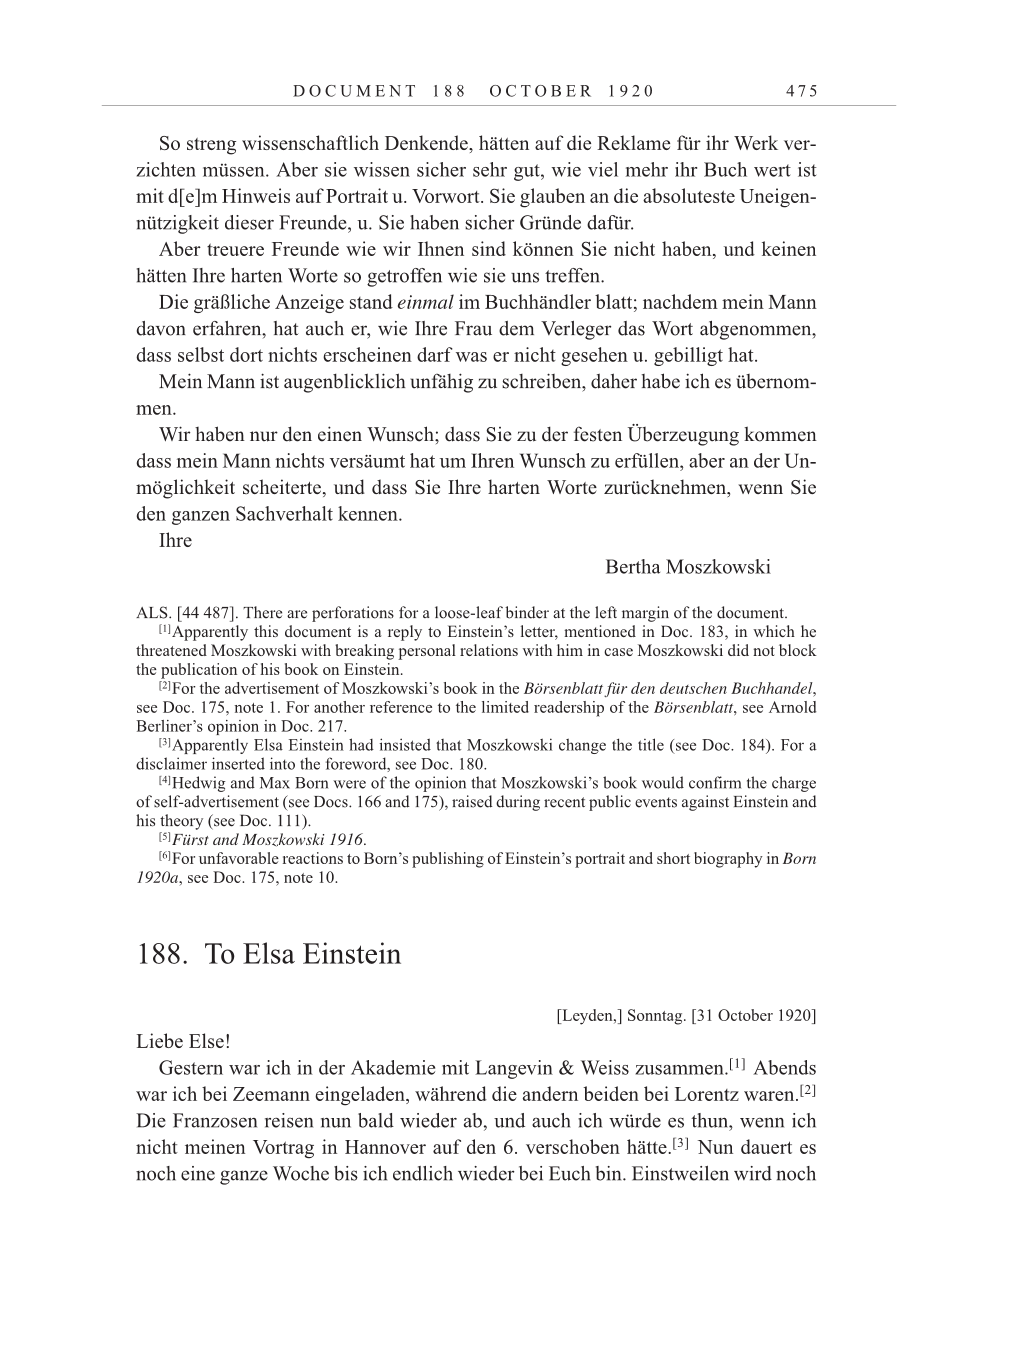 Volume 10: The Berlin Years: Correspondence May-December 1920 / Supplementary Correspondence 1909-1920 page 475